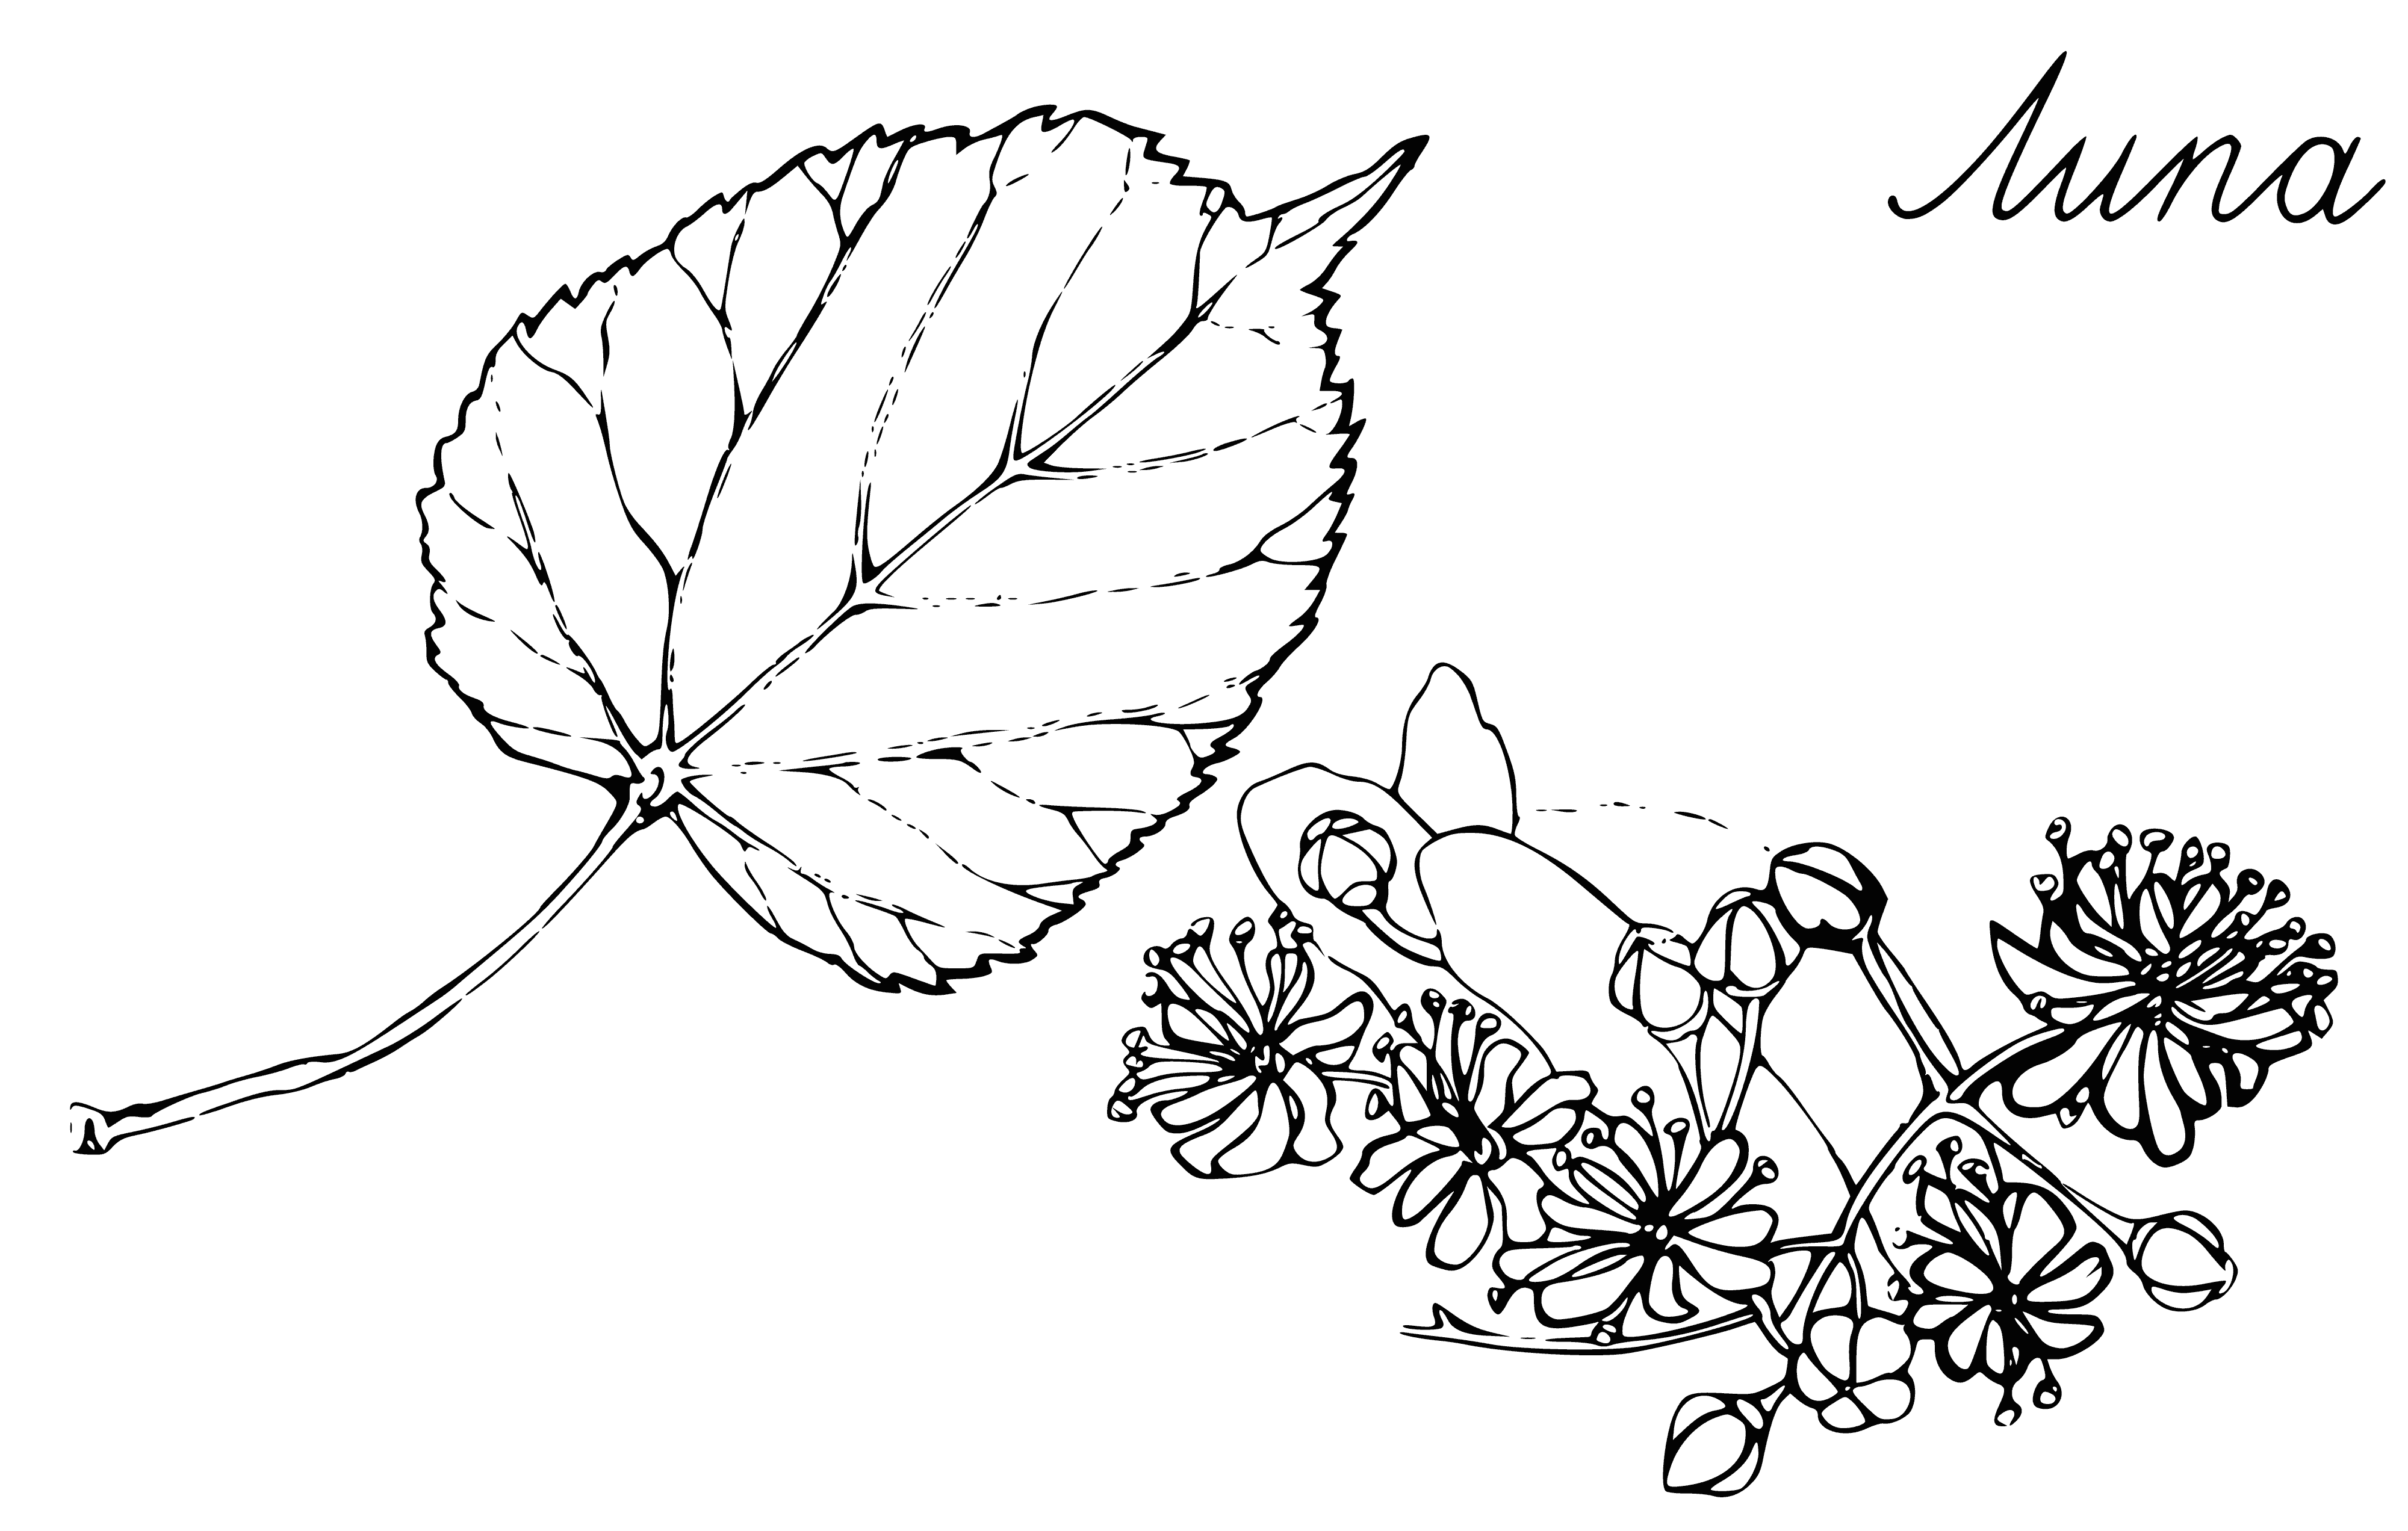 coloring page: A tree w/ green leaves of different sizes/shapes, small yellow flowers, brown bark/branches & small green fruits.